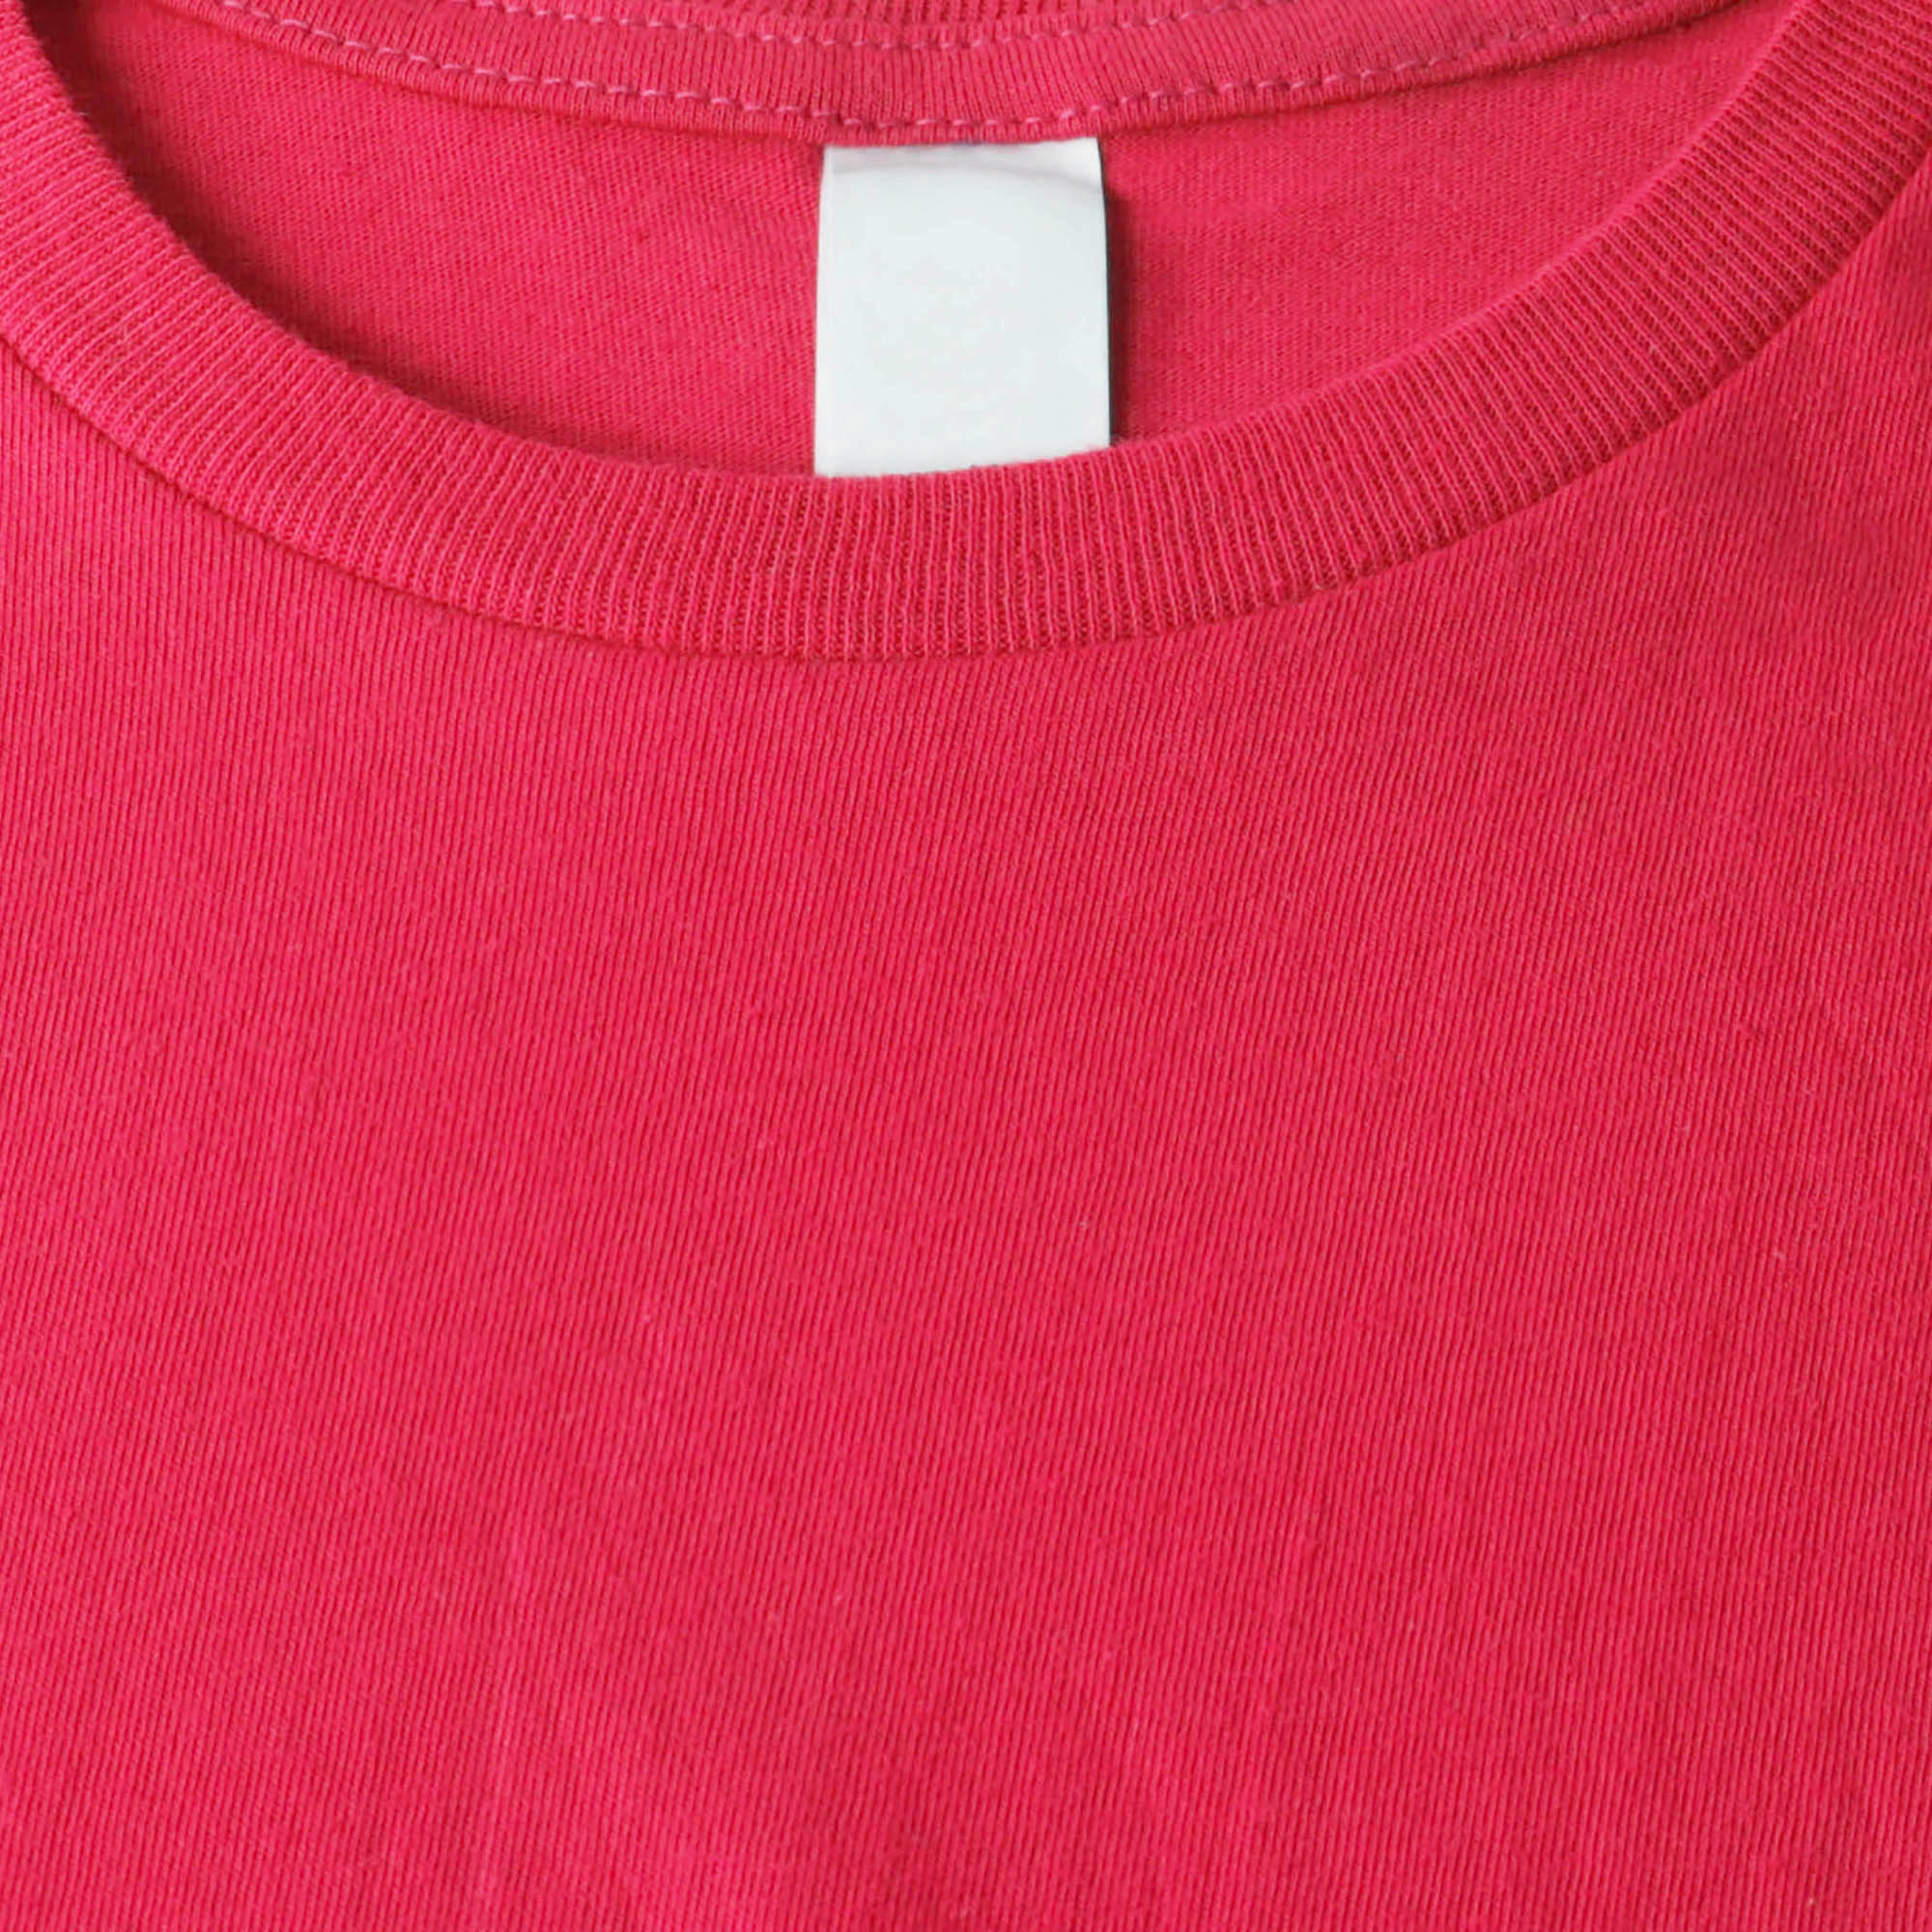 comfort tee_comfort color tees_comfort colors tee shirts_womens tee_tee shirts for women_best quality t shirts for women_Fuchsia